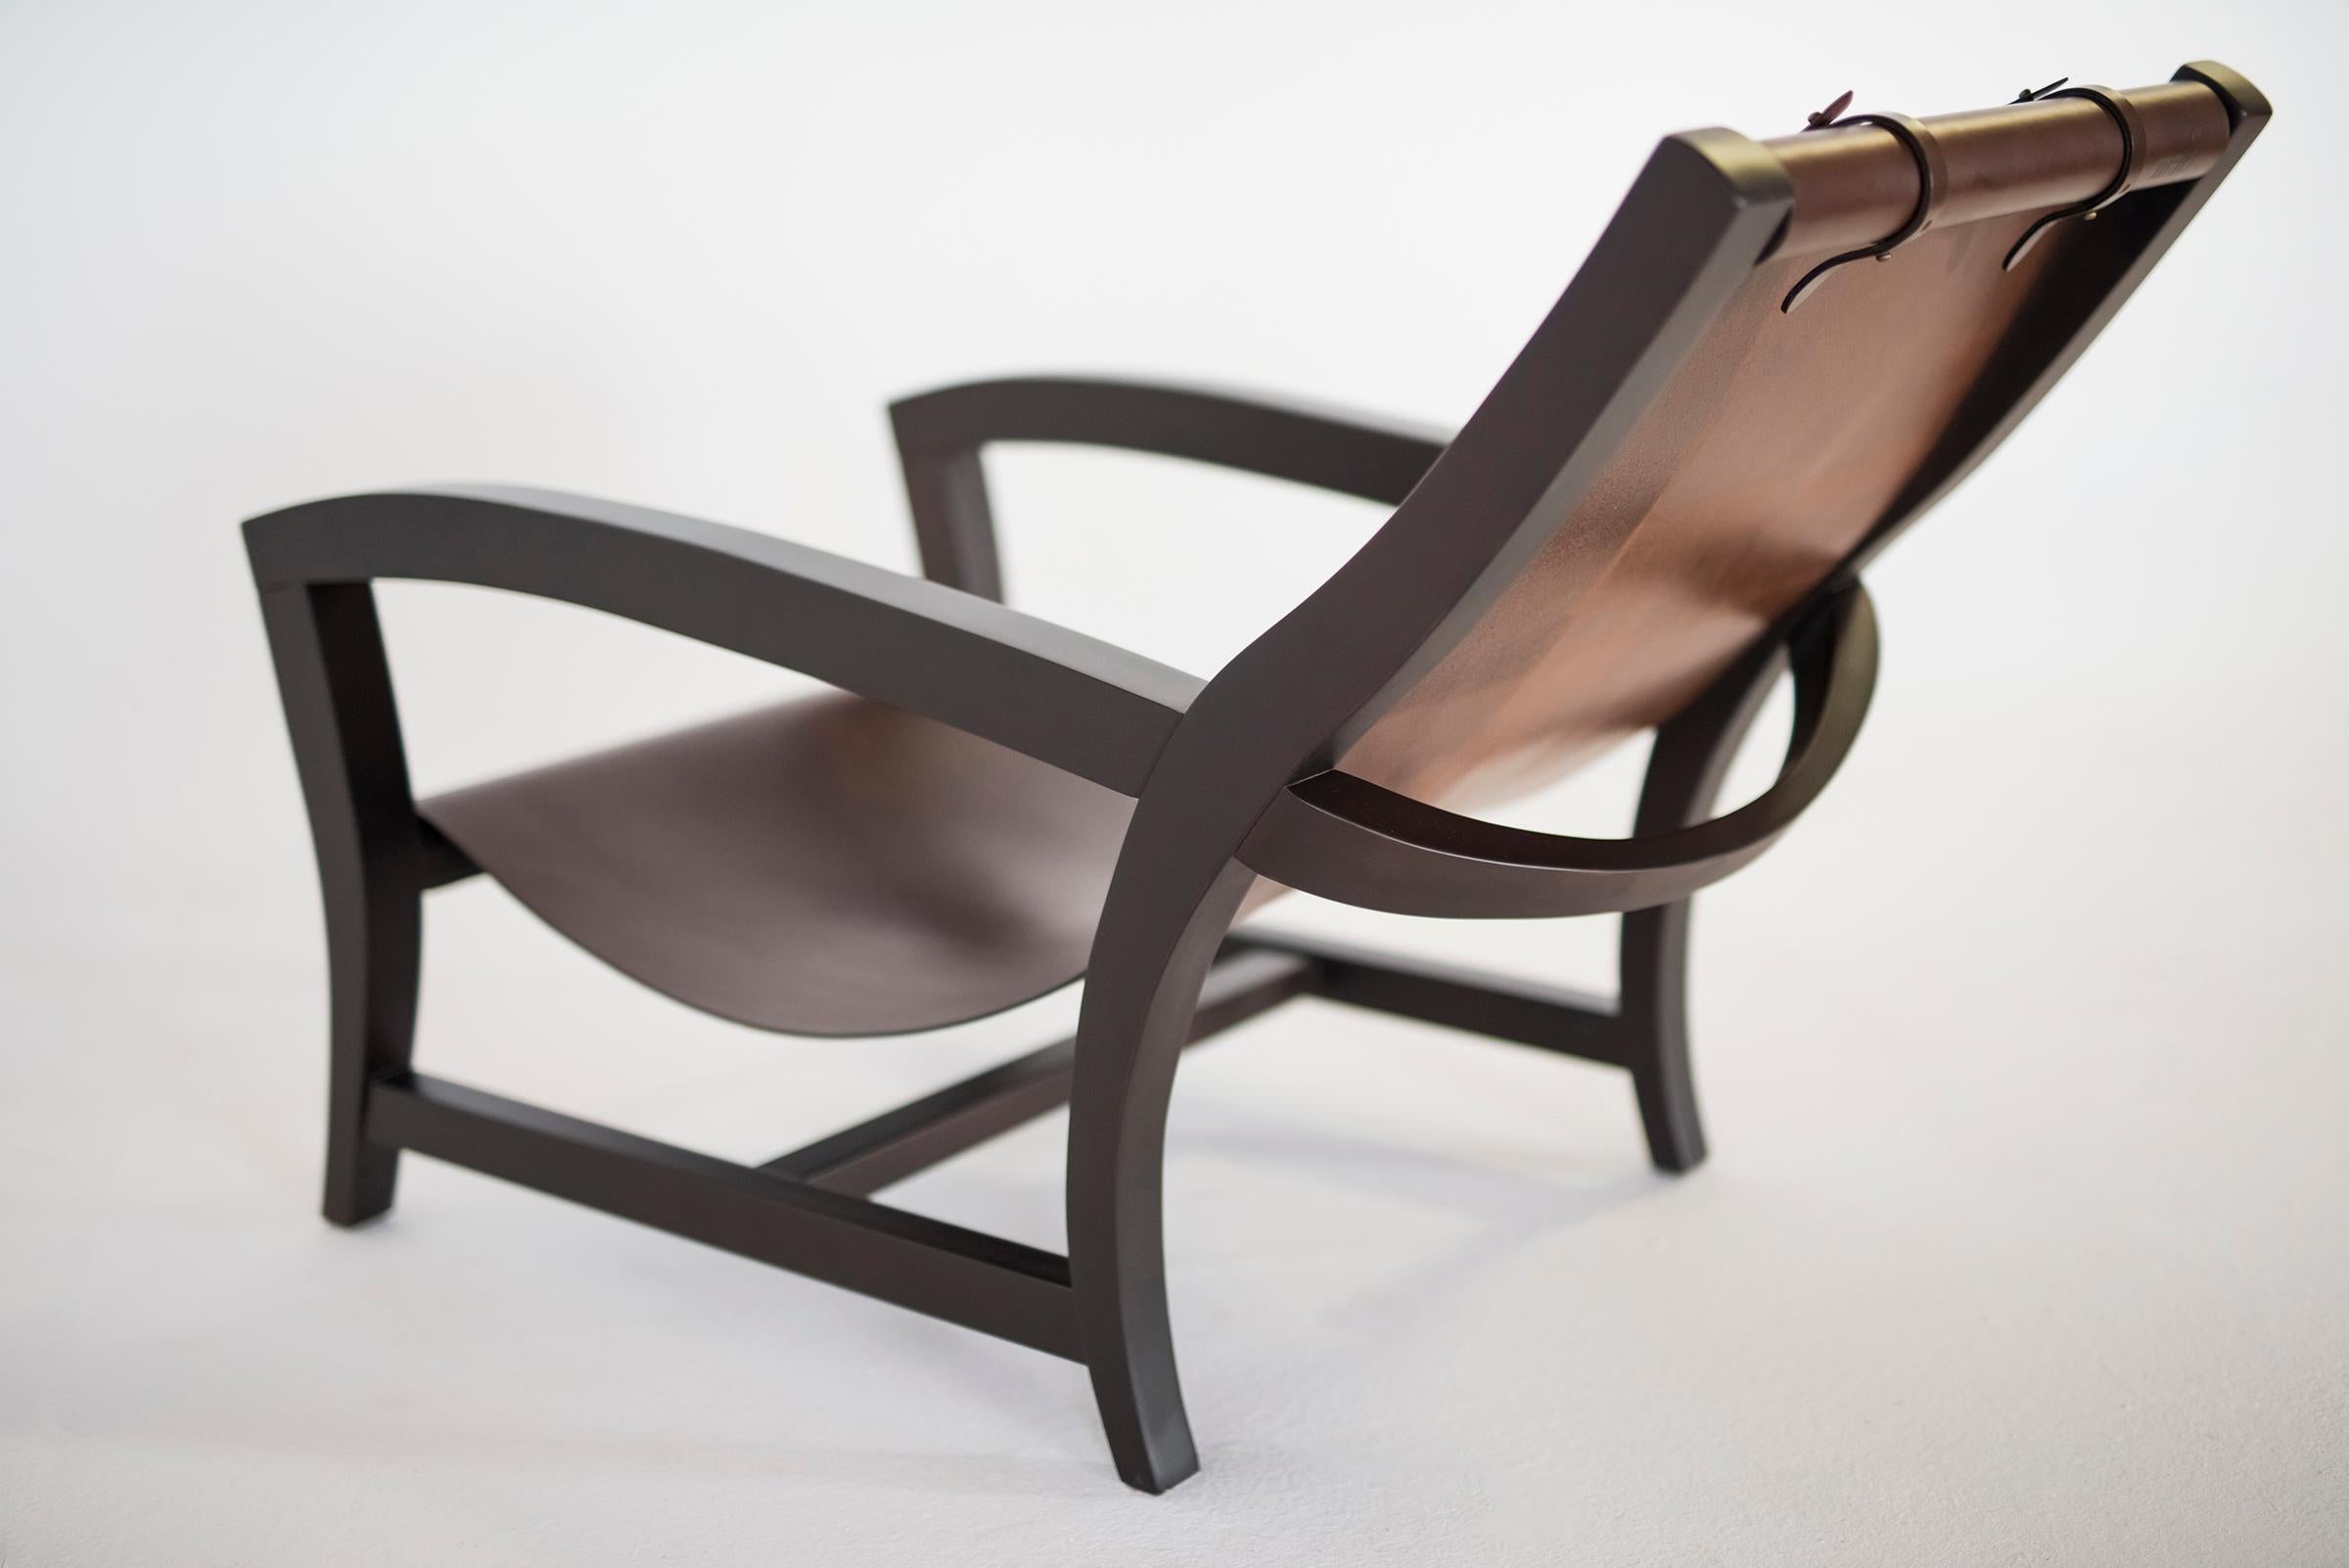 Italian Elba, Deckchair Inspiration for This Leather and Beechwood Indoor Lounge Chair For Sale